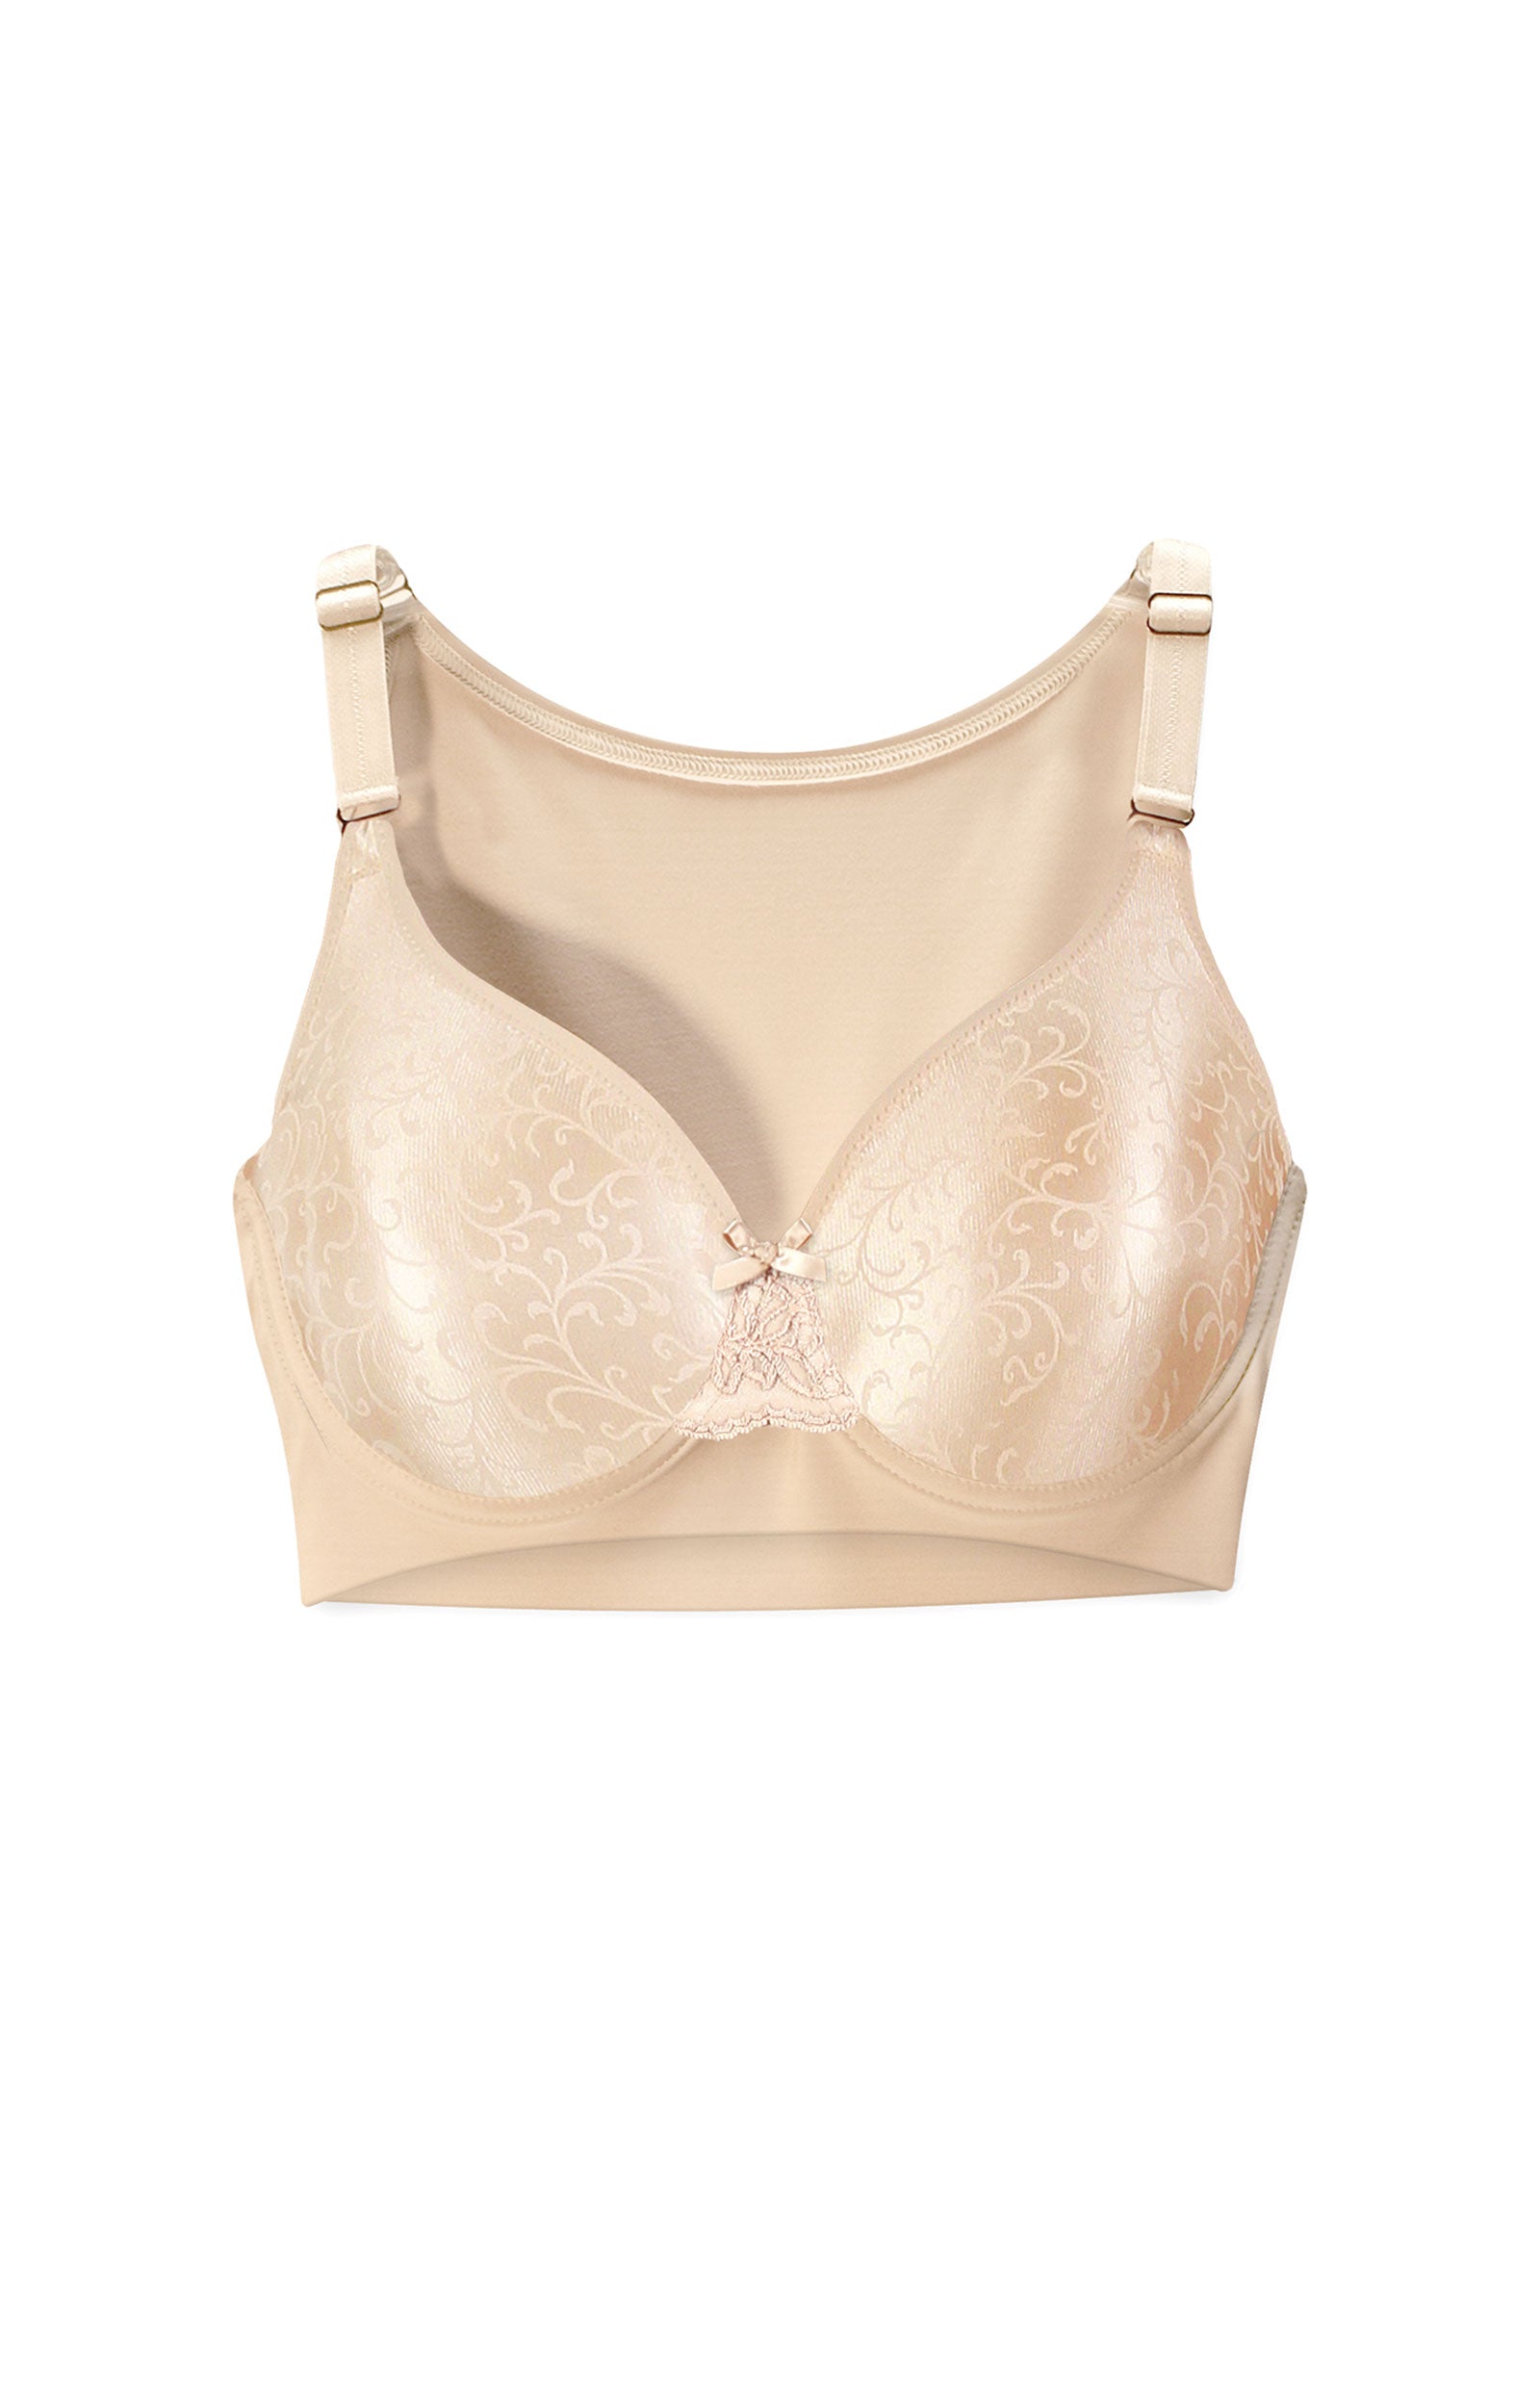 LIVELY The Minimizer Bras for Women, Full Coverage Flexible Underwire Bra  Smoothes and Shapes